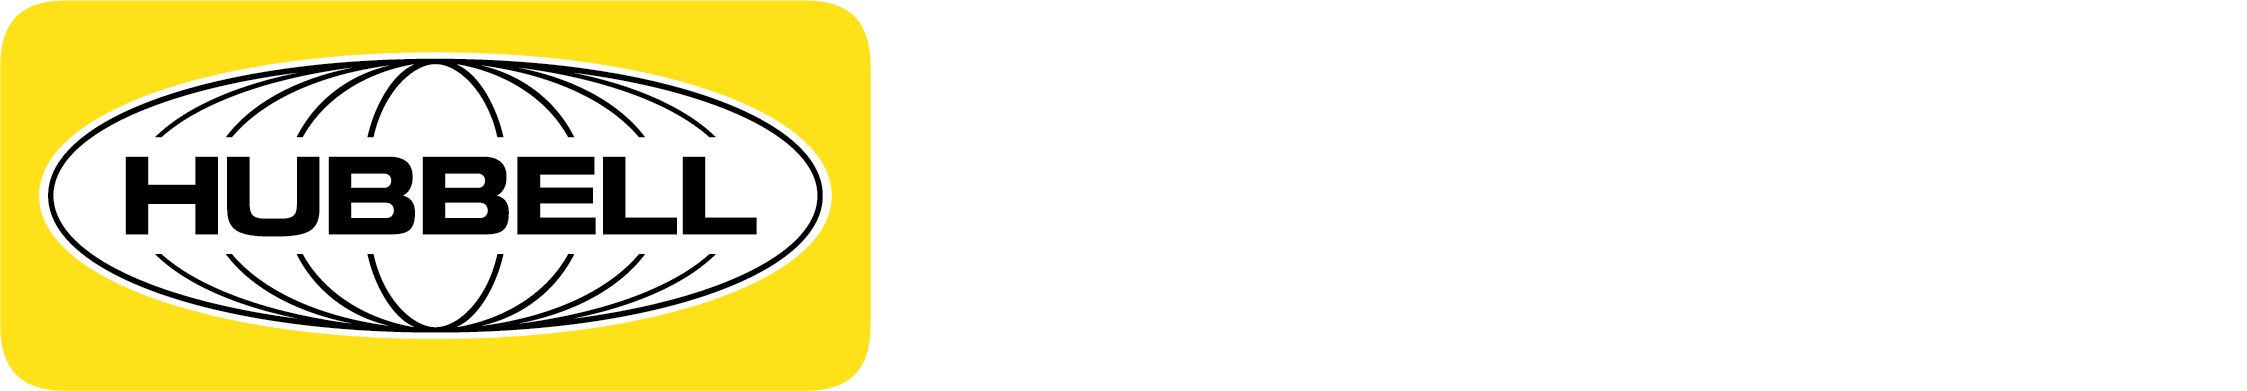 Hubbell Logo - Hubbell Lighting Resources